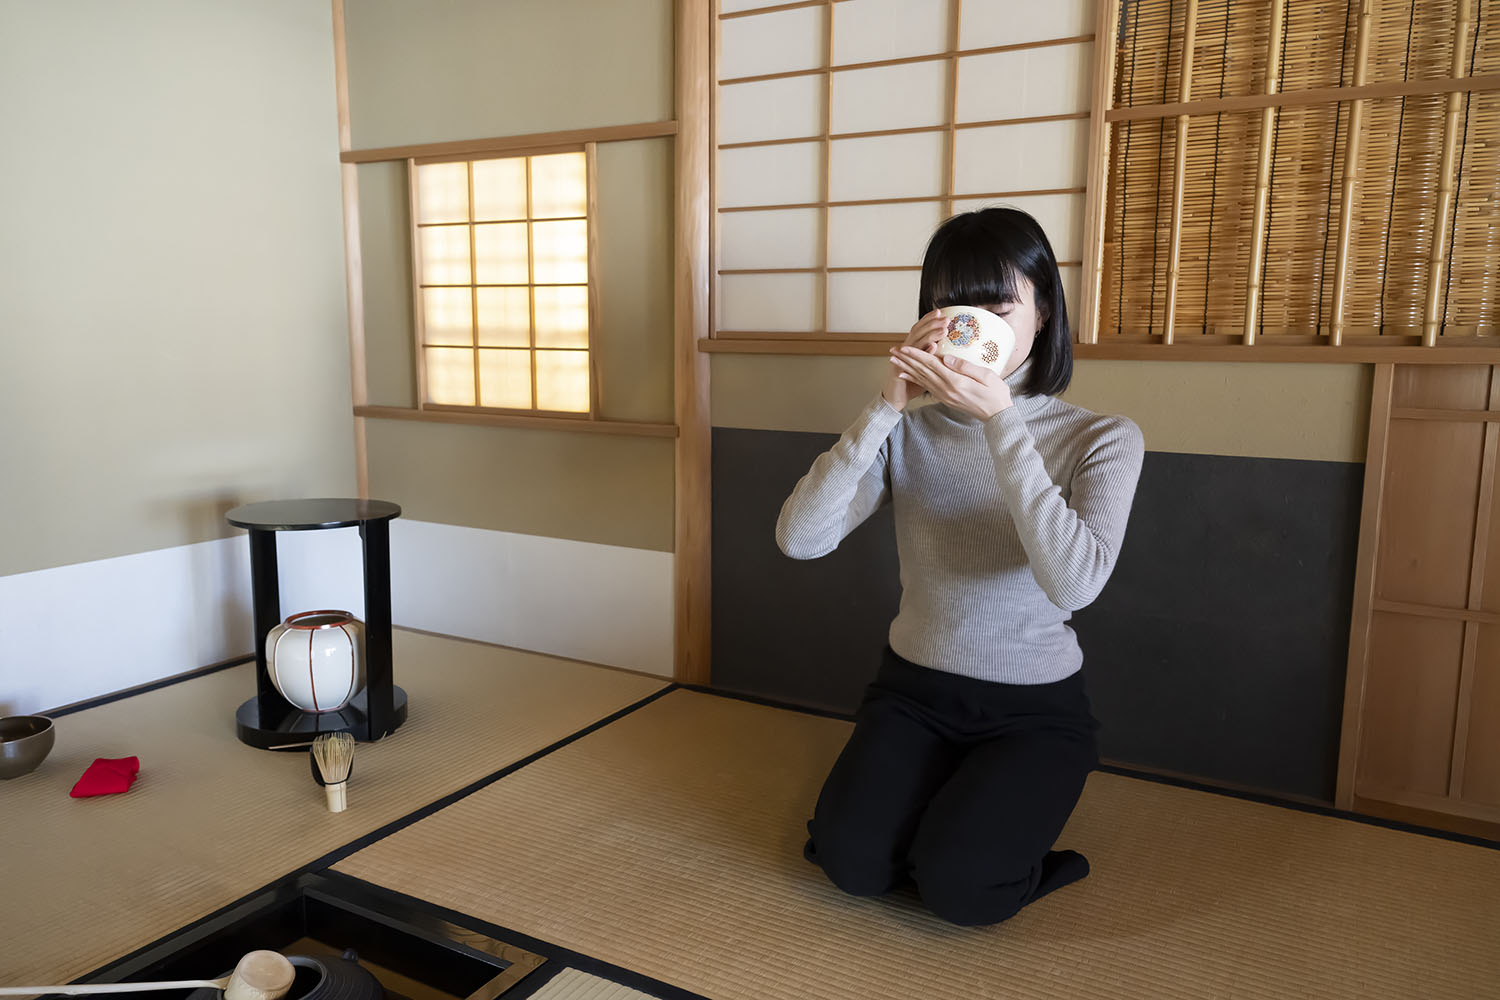 How to enjoy matcha | Studying teahouse etiquette at Fukujuen in Kyoto